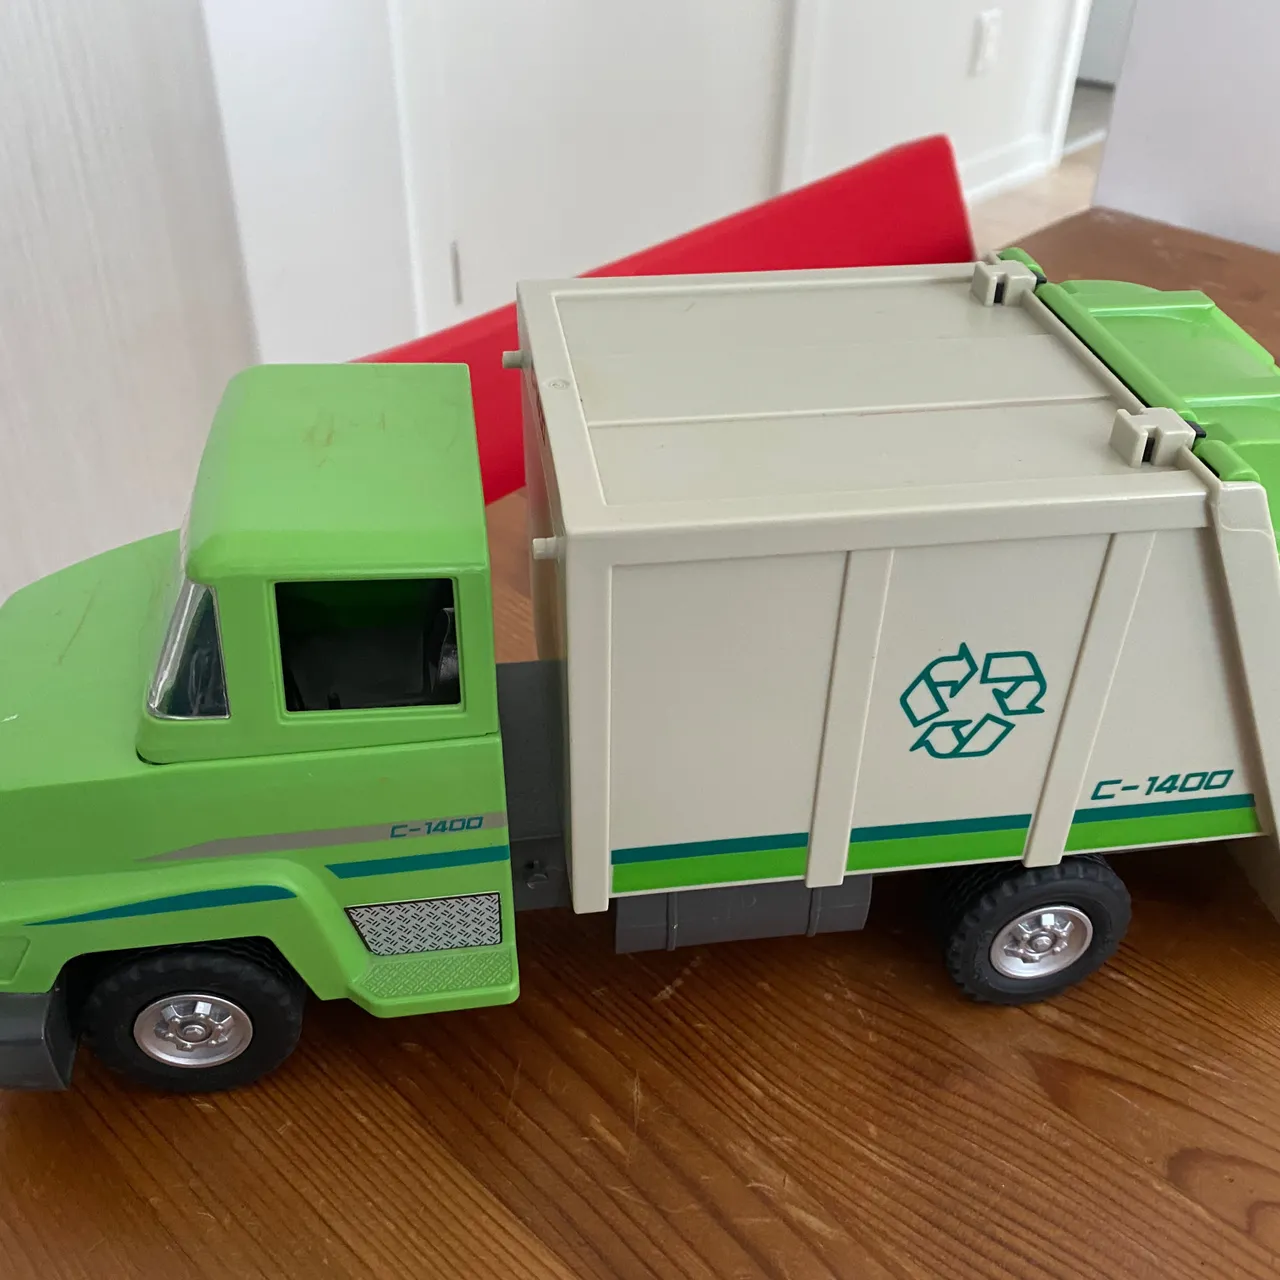 Playmobil Recycling truck toy photo 1